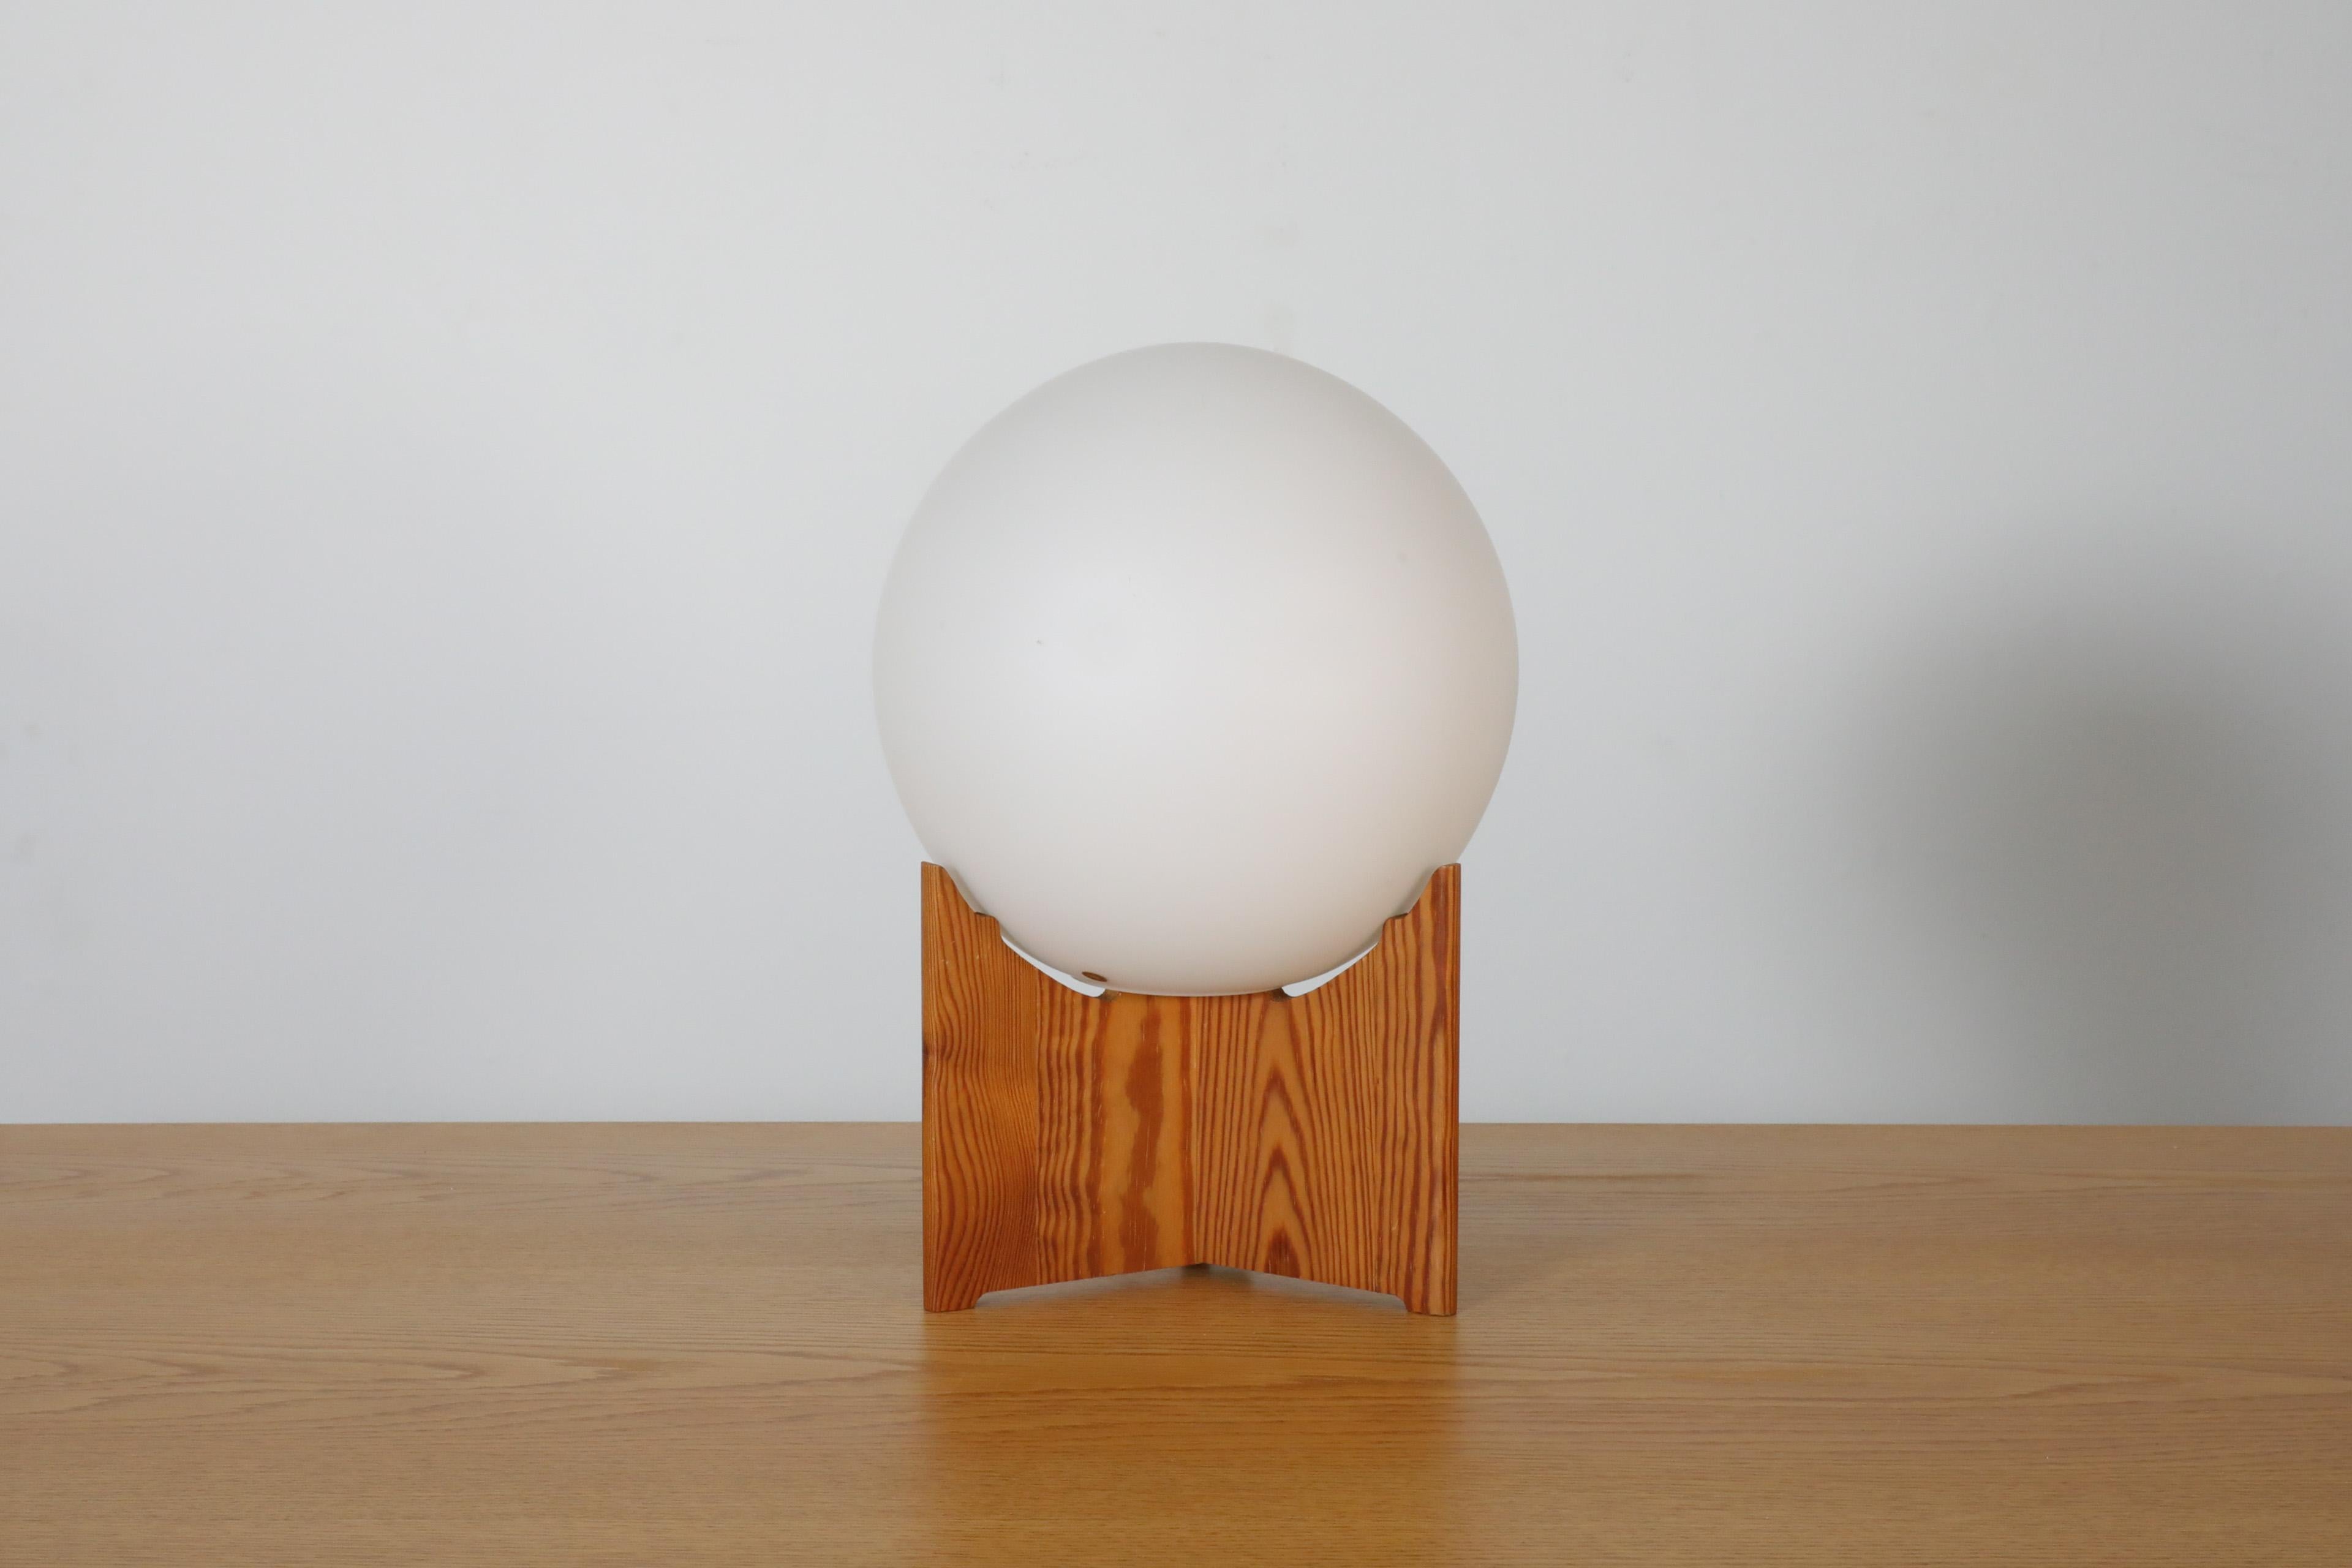 Mid-Century AB Markaryd table lamp with pine base and milk glass globe shade by Hans-Agne Jakobsson. Stylish table lamp with lovely carved wood base and unattached globe shade. In original condition with visible wear consistent with its age and use.